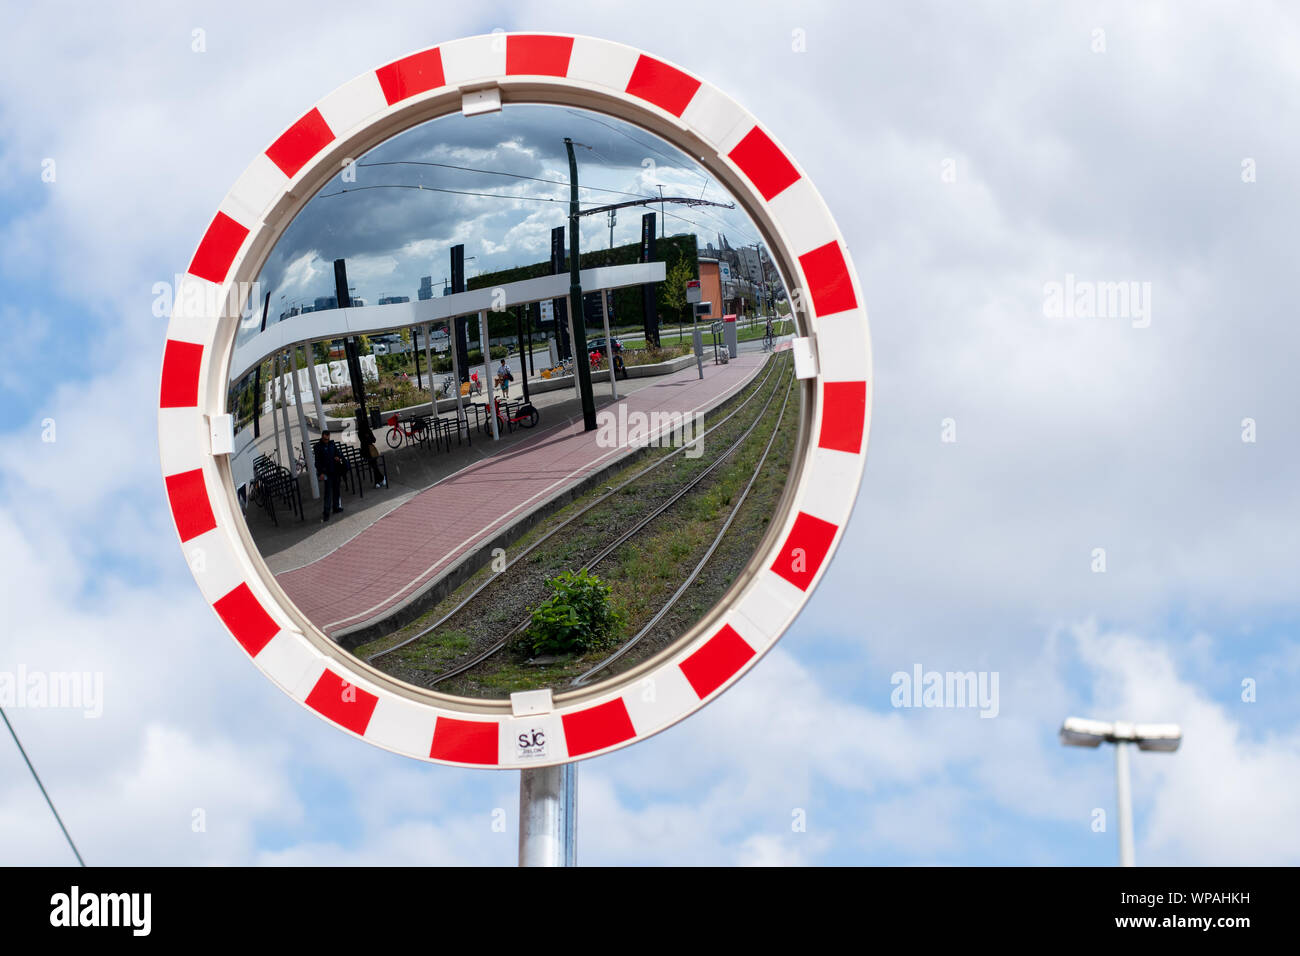 A view of a tram stop in a mirror in Brussels, Belgium Stock Photo